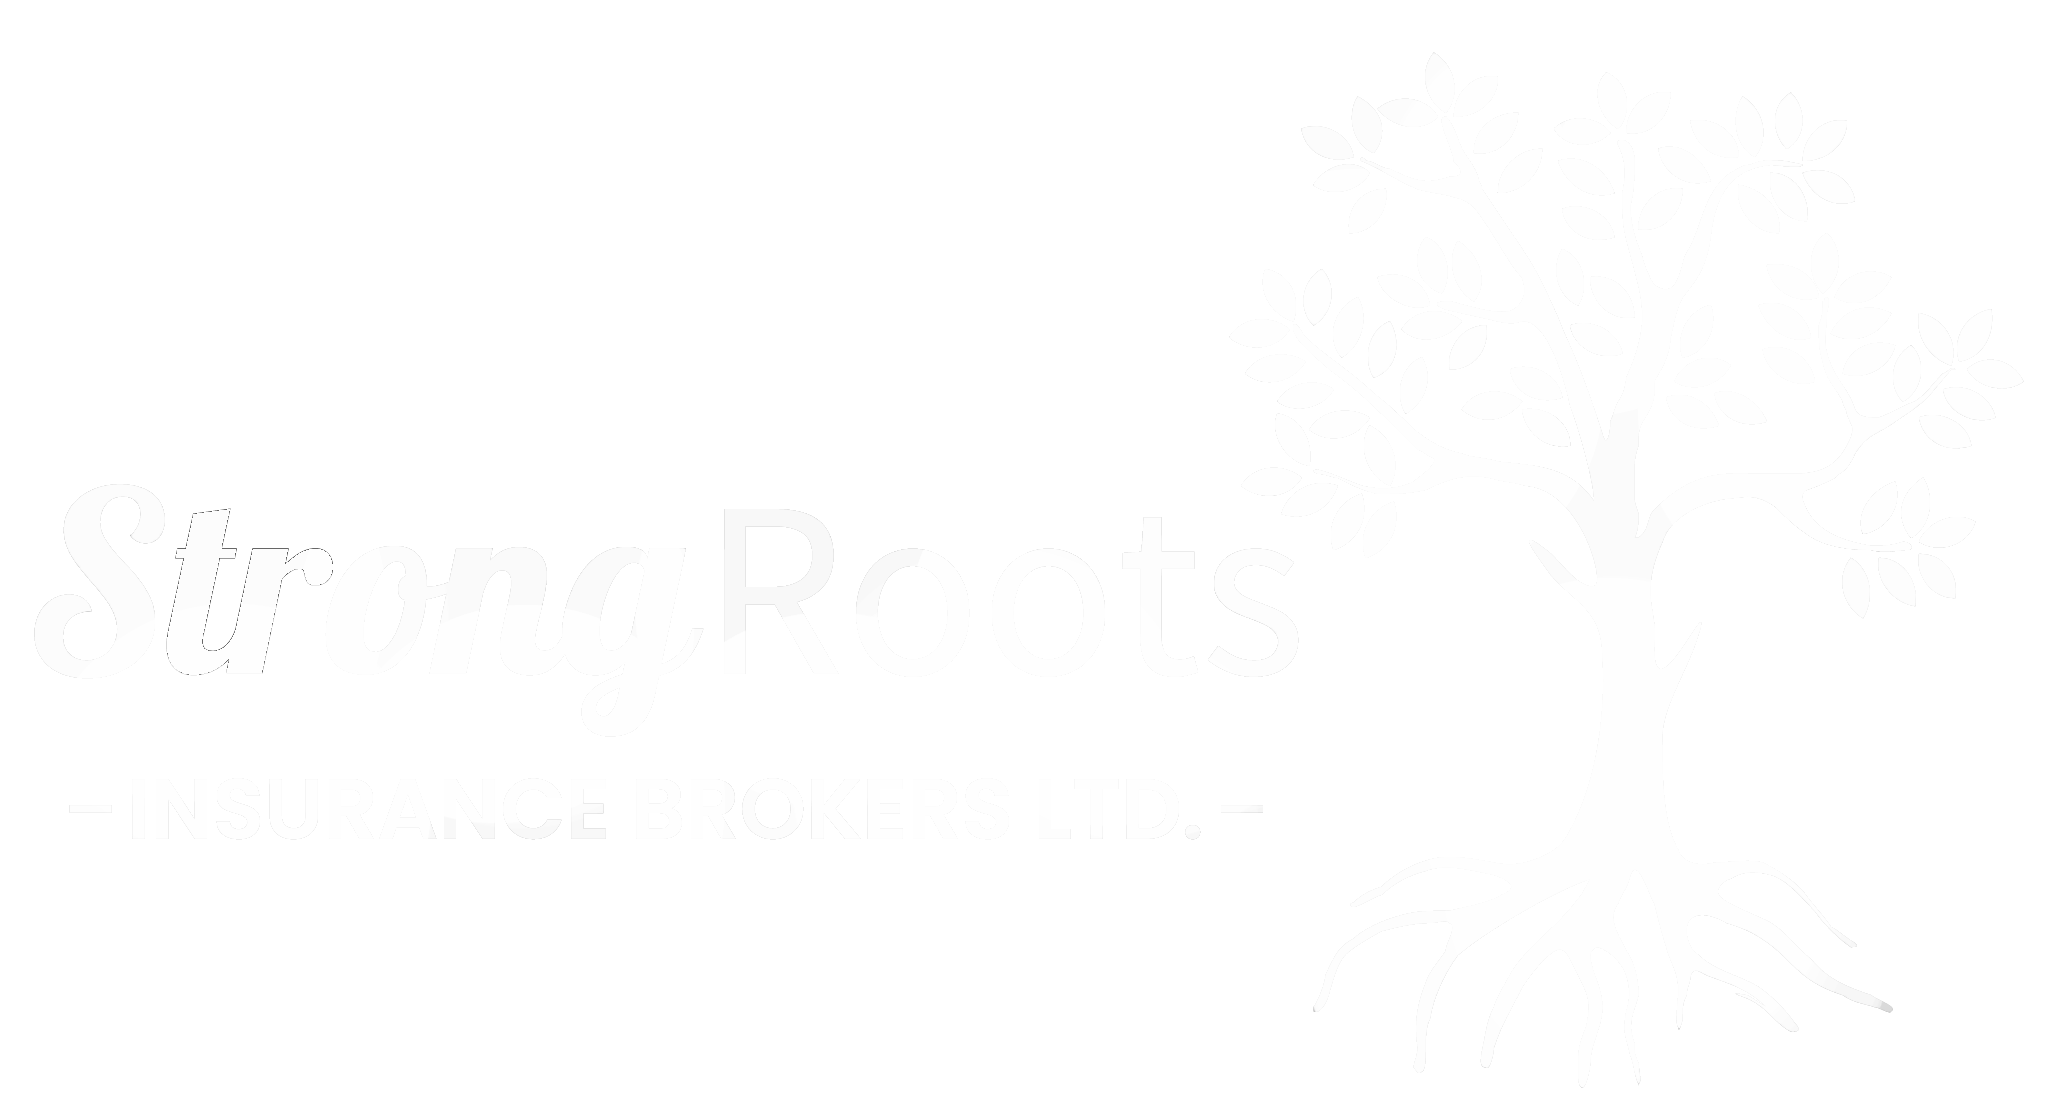 Strong Roots Insurance Logo